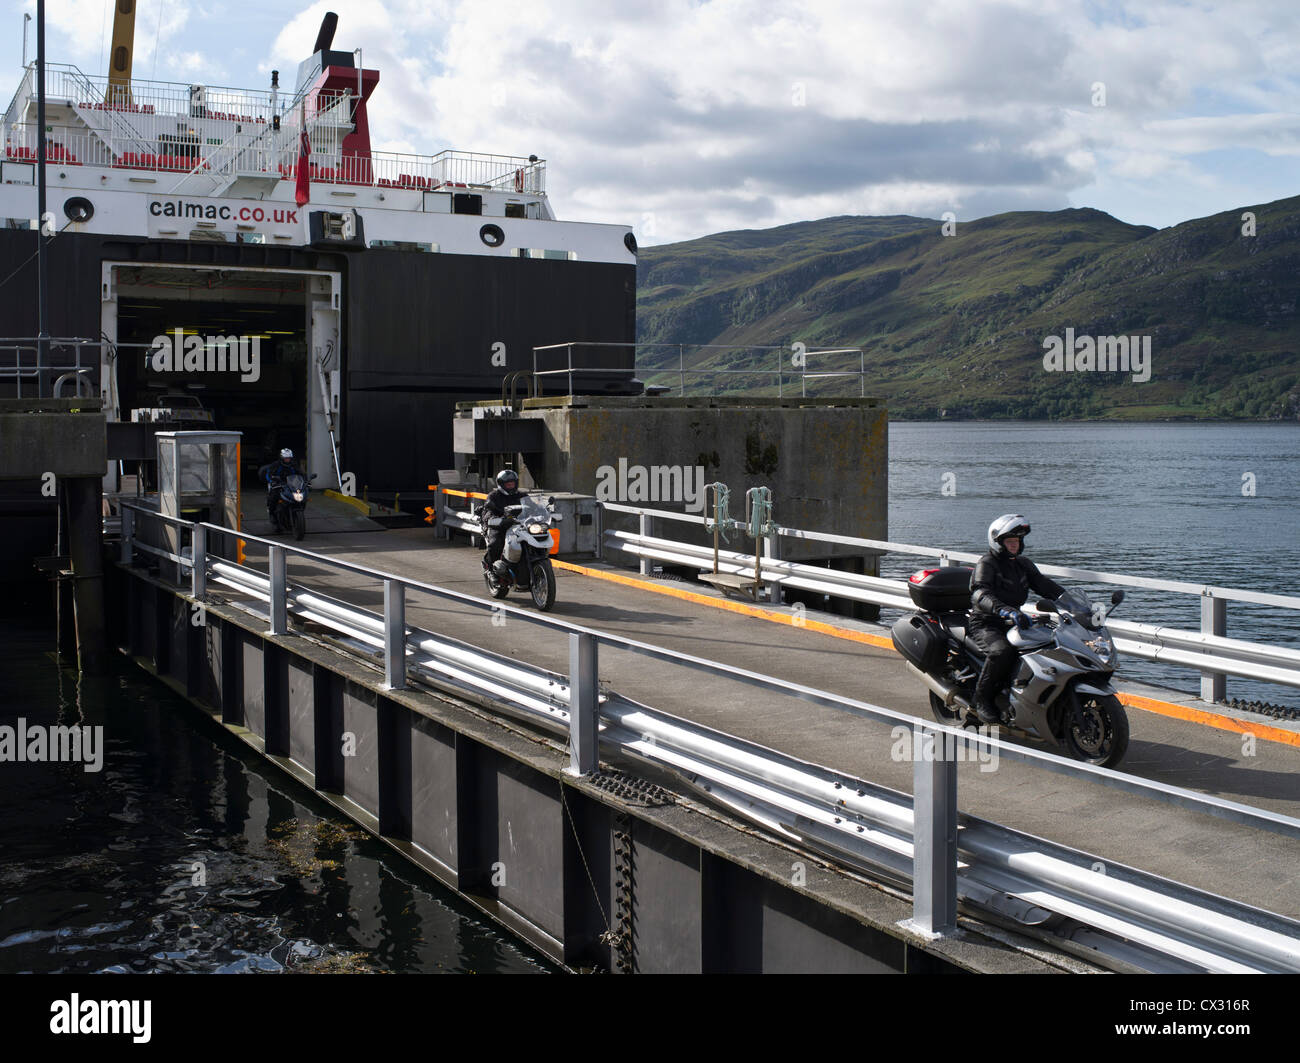 dh ferry ULLAPOOL ROSS CROMARTY Outer Herbrides ferry Isle of Lewis discharging motor bikes scotland people scottish highlands calmac bike ride Stock Photo